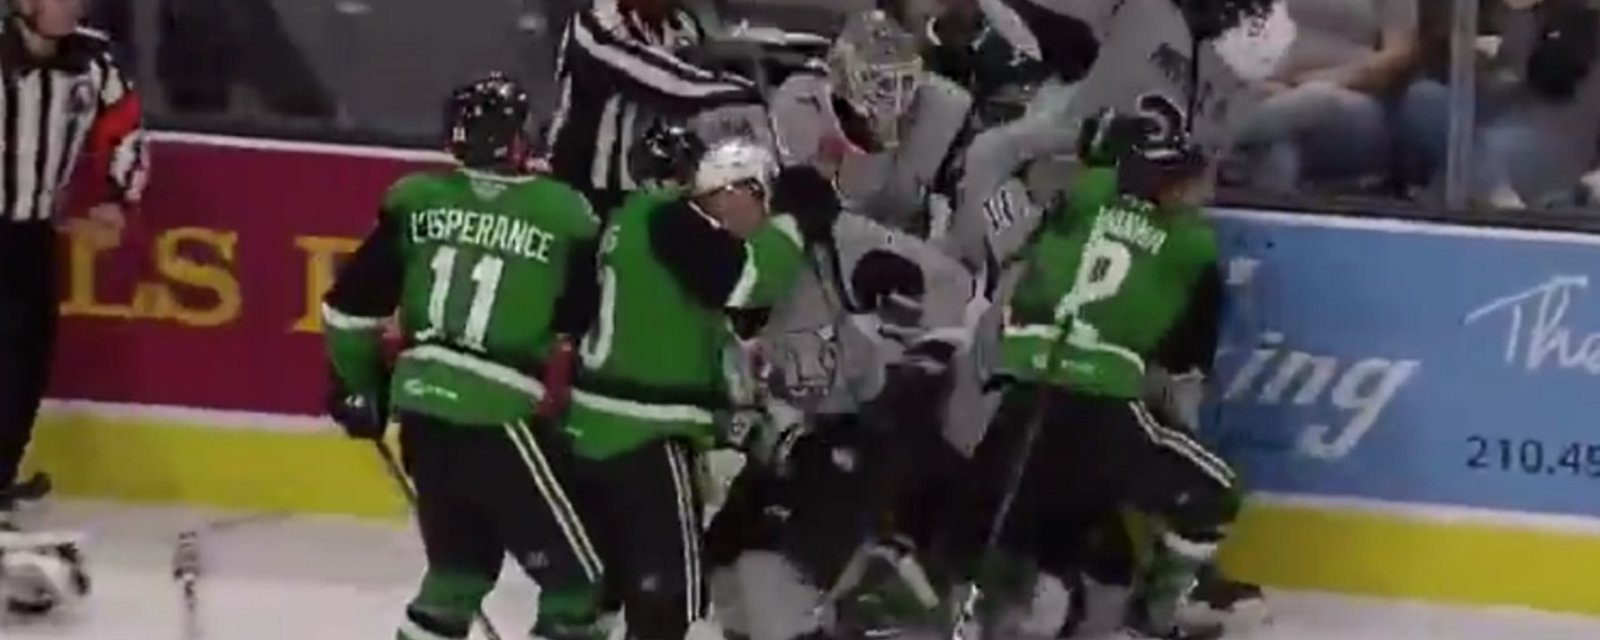 Goalie snaps and tries to fight an entire team after giving up 7 goals.